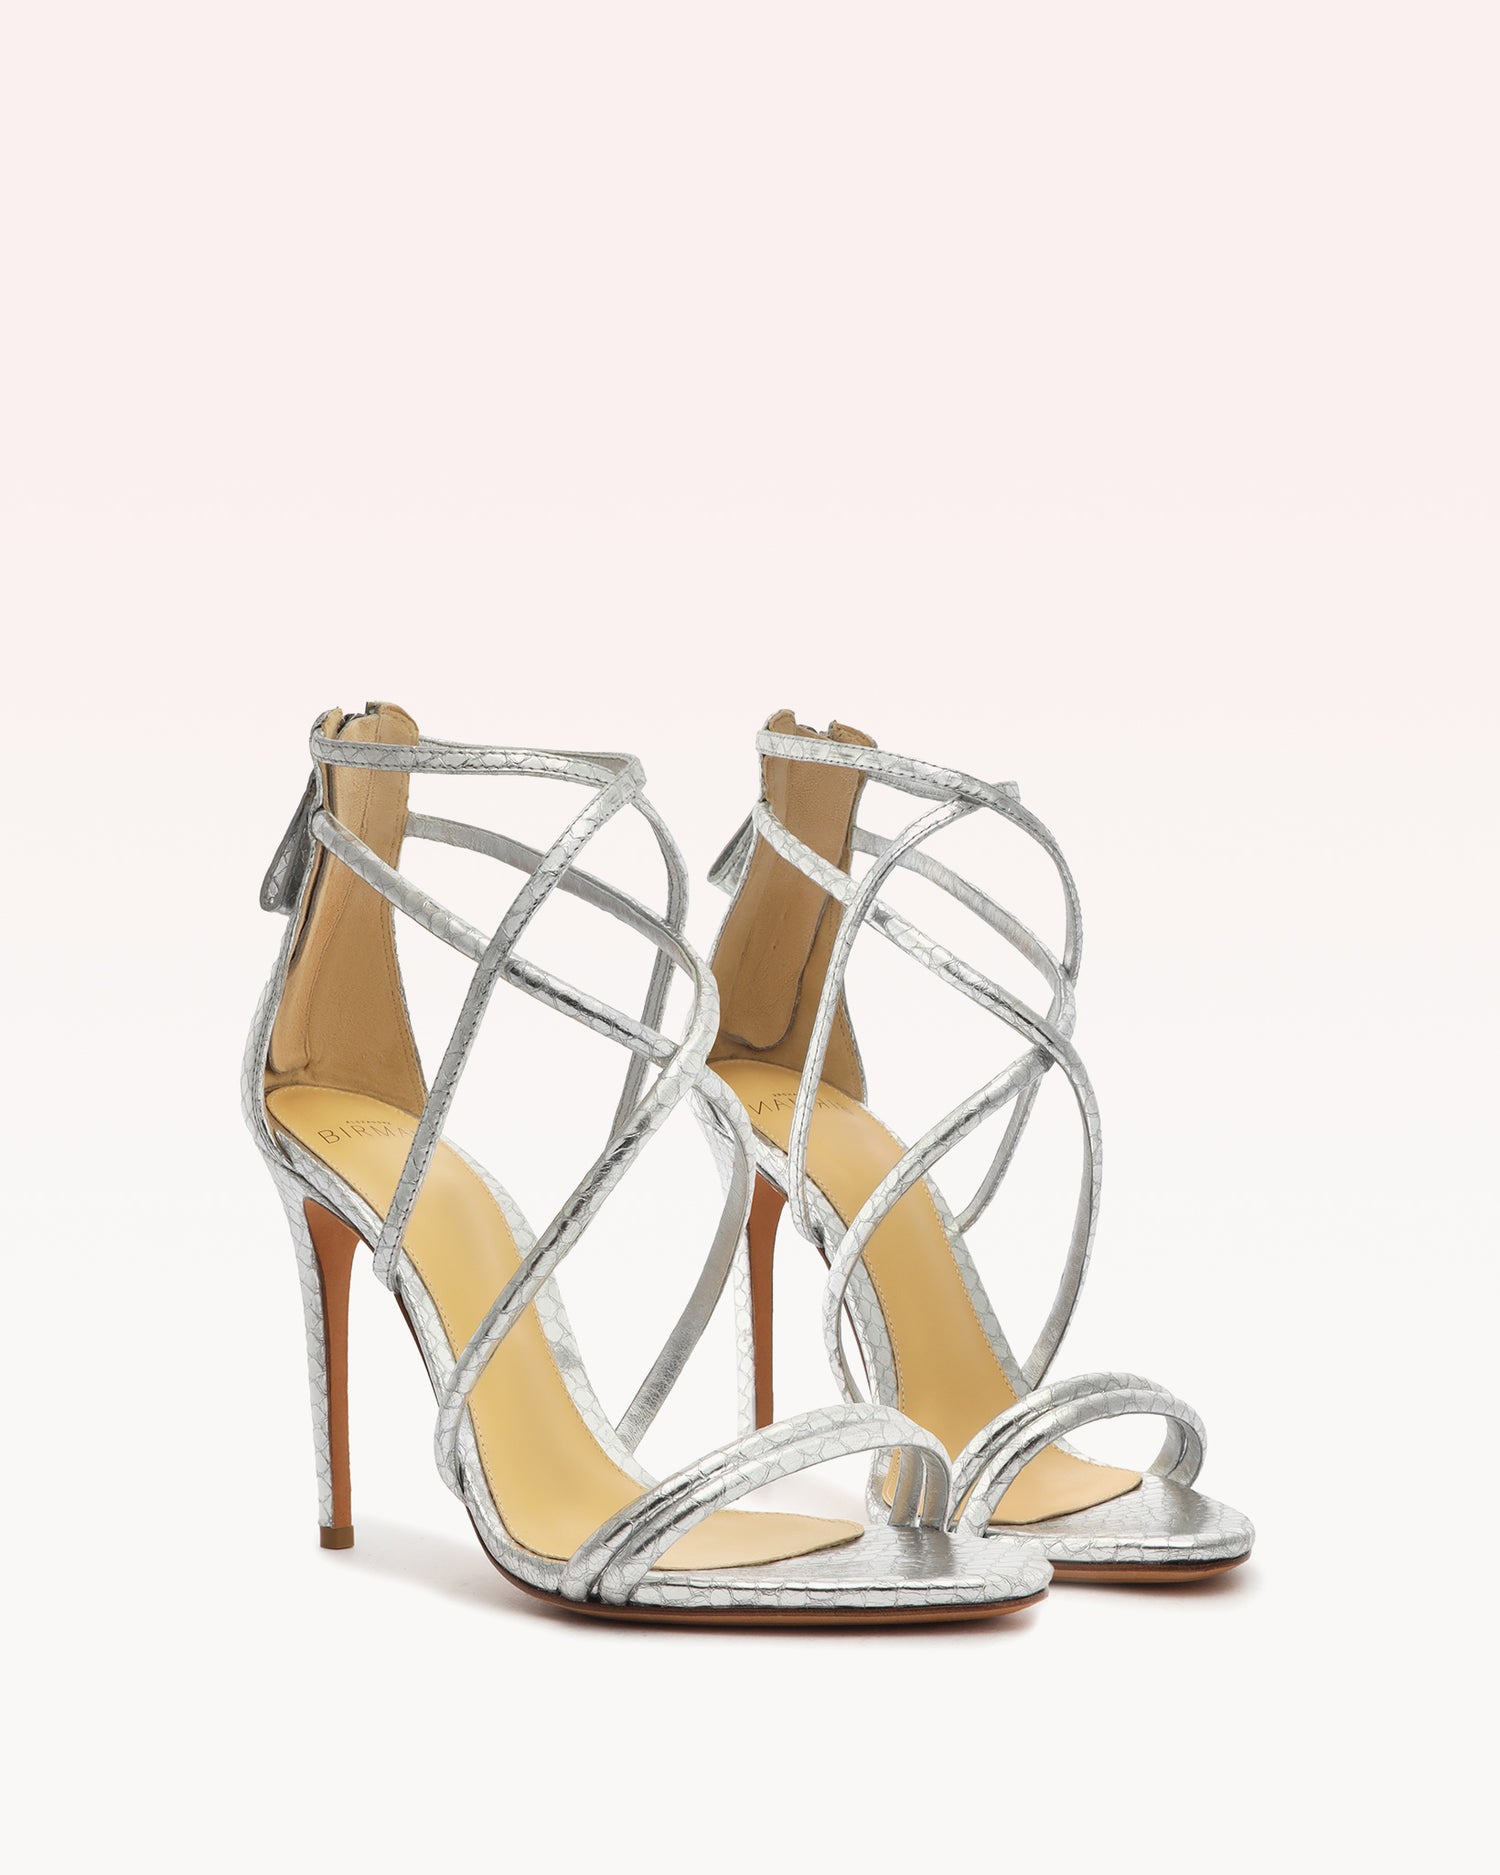 Eve 100 Silver Sandals PRE FALL 23   